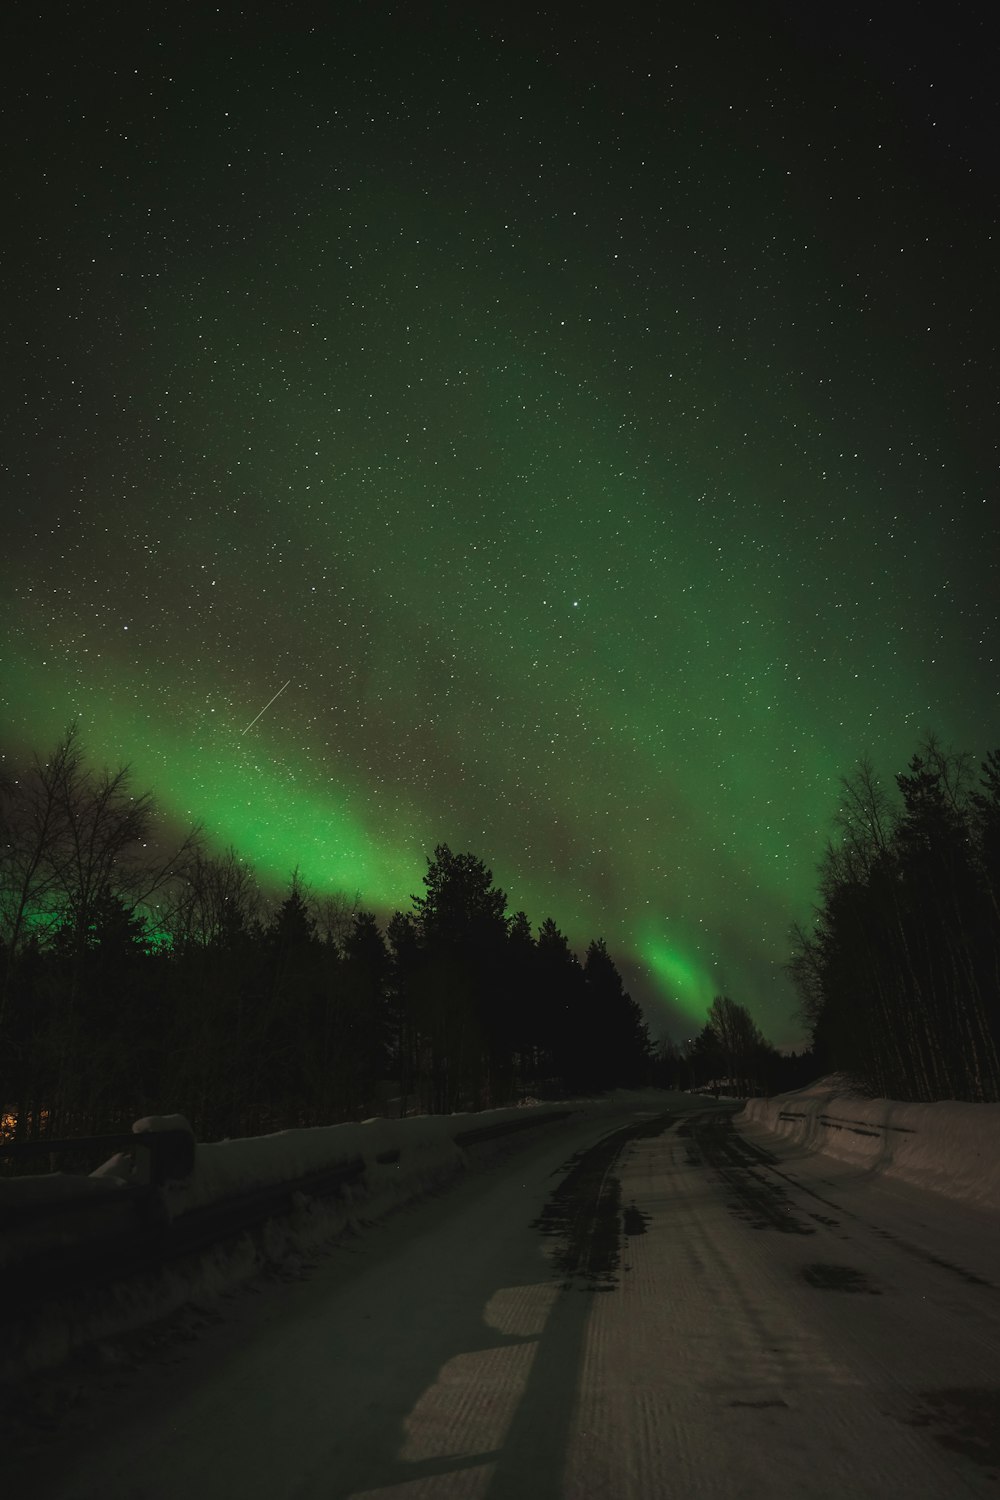 a road with snow on the ground and green lights in the sky